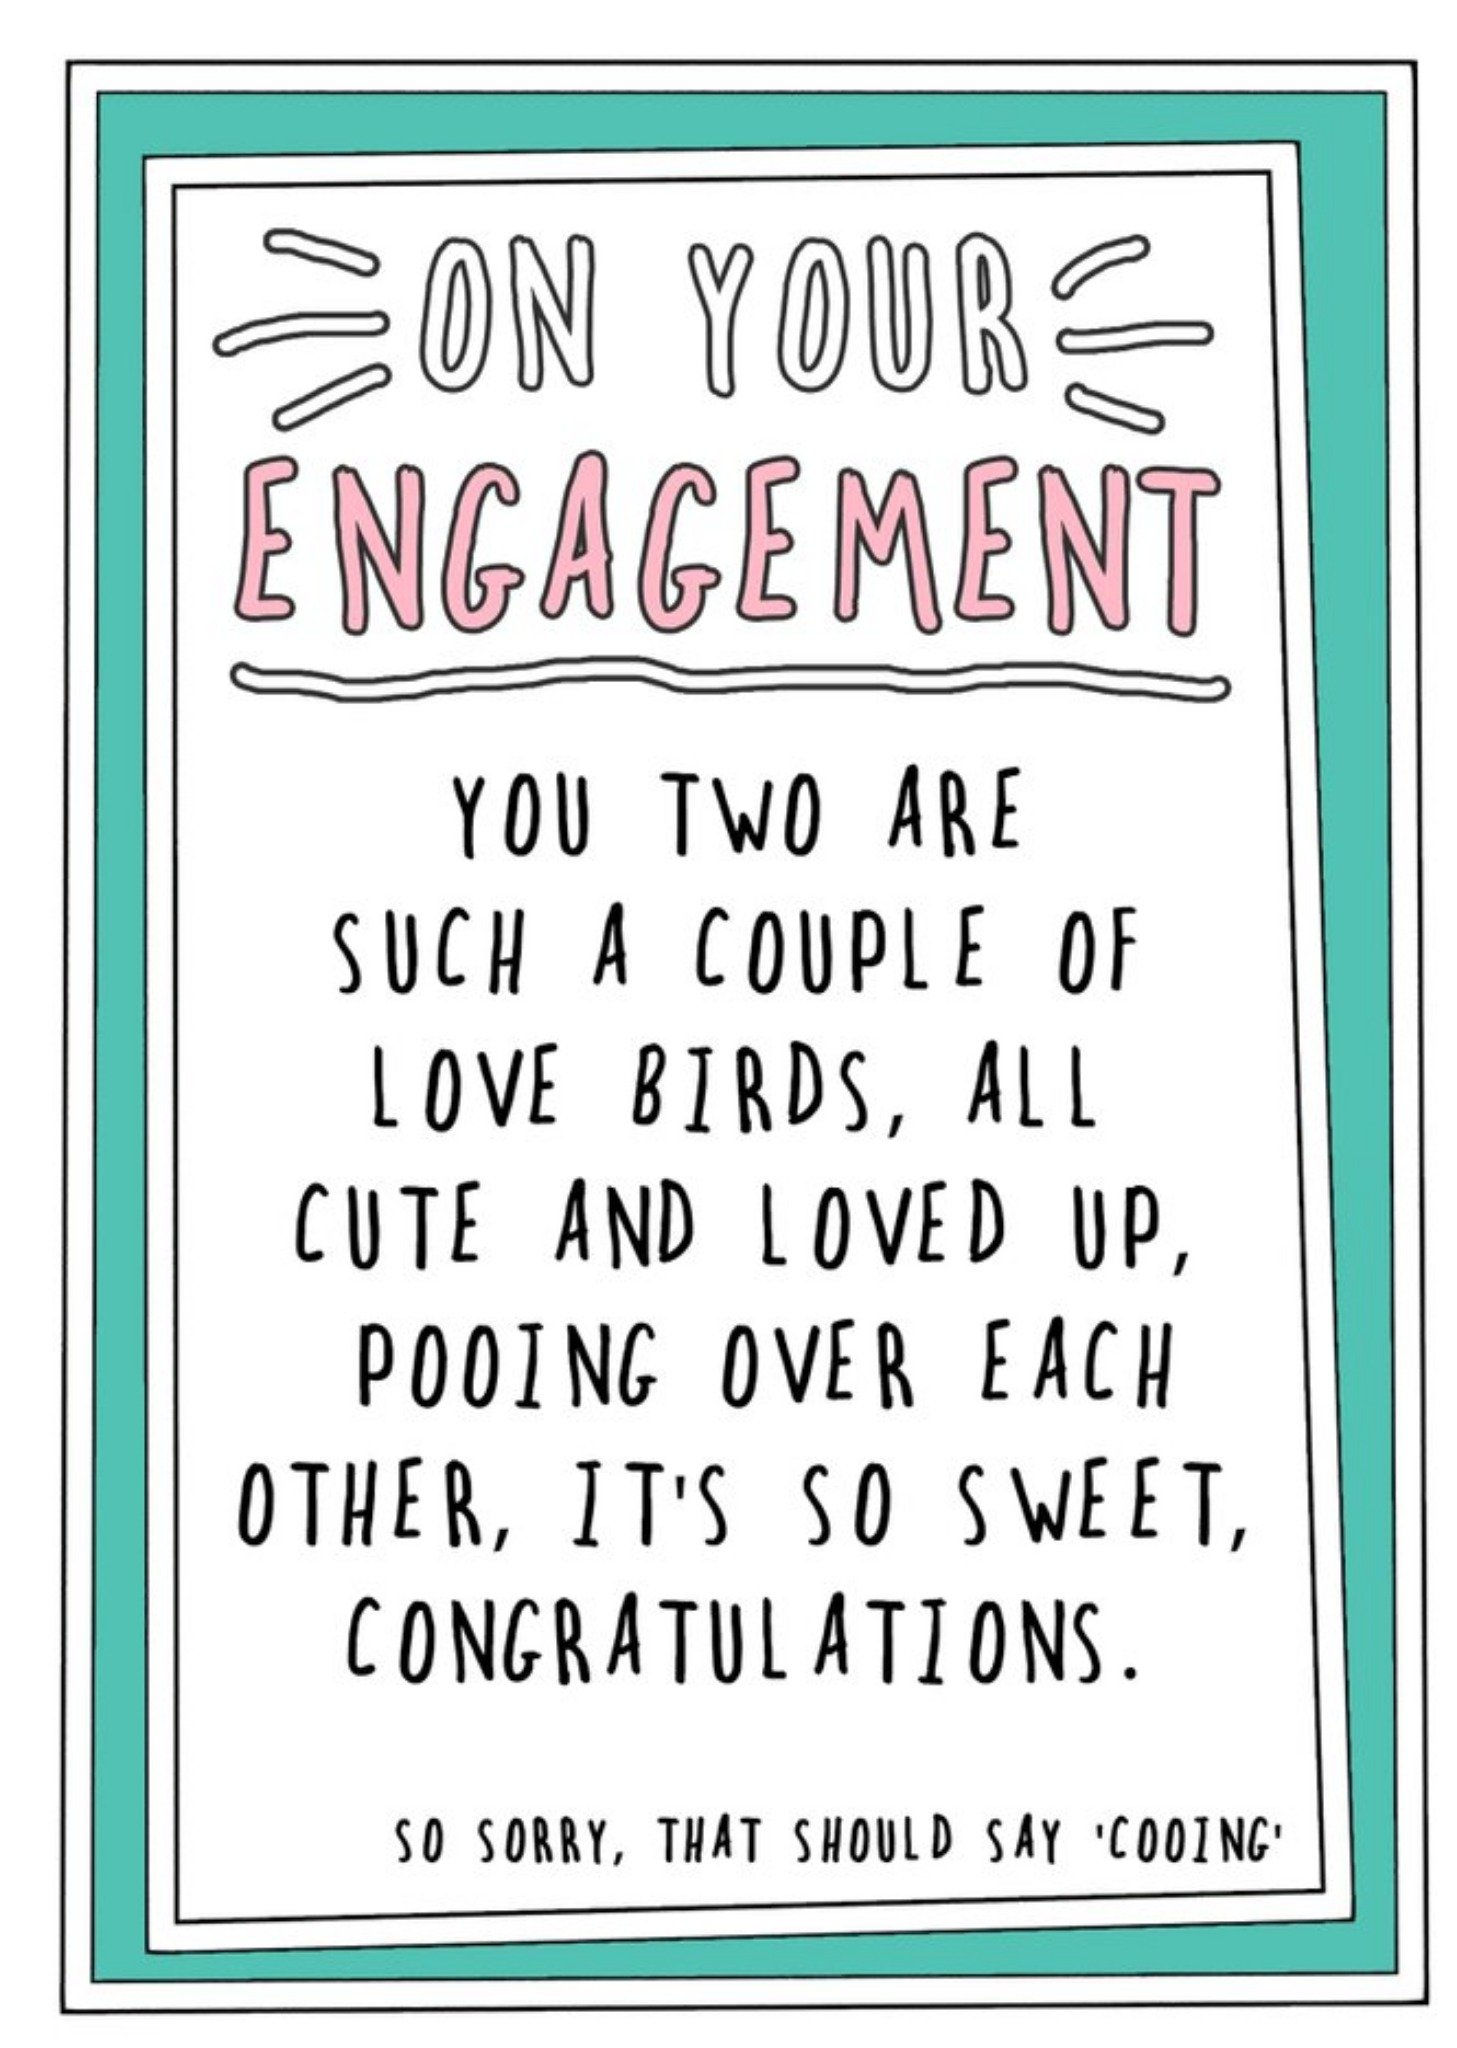 Go La La Funny On Your Engagement, Pooing Over Each Other Card, Large